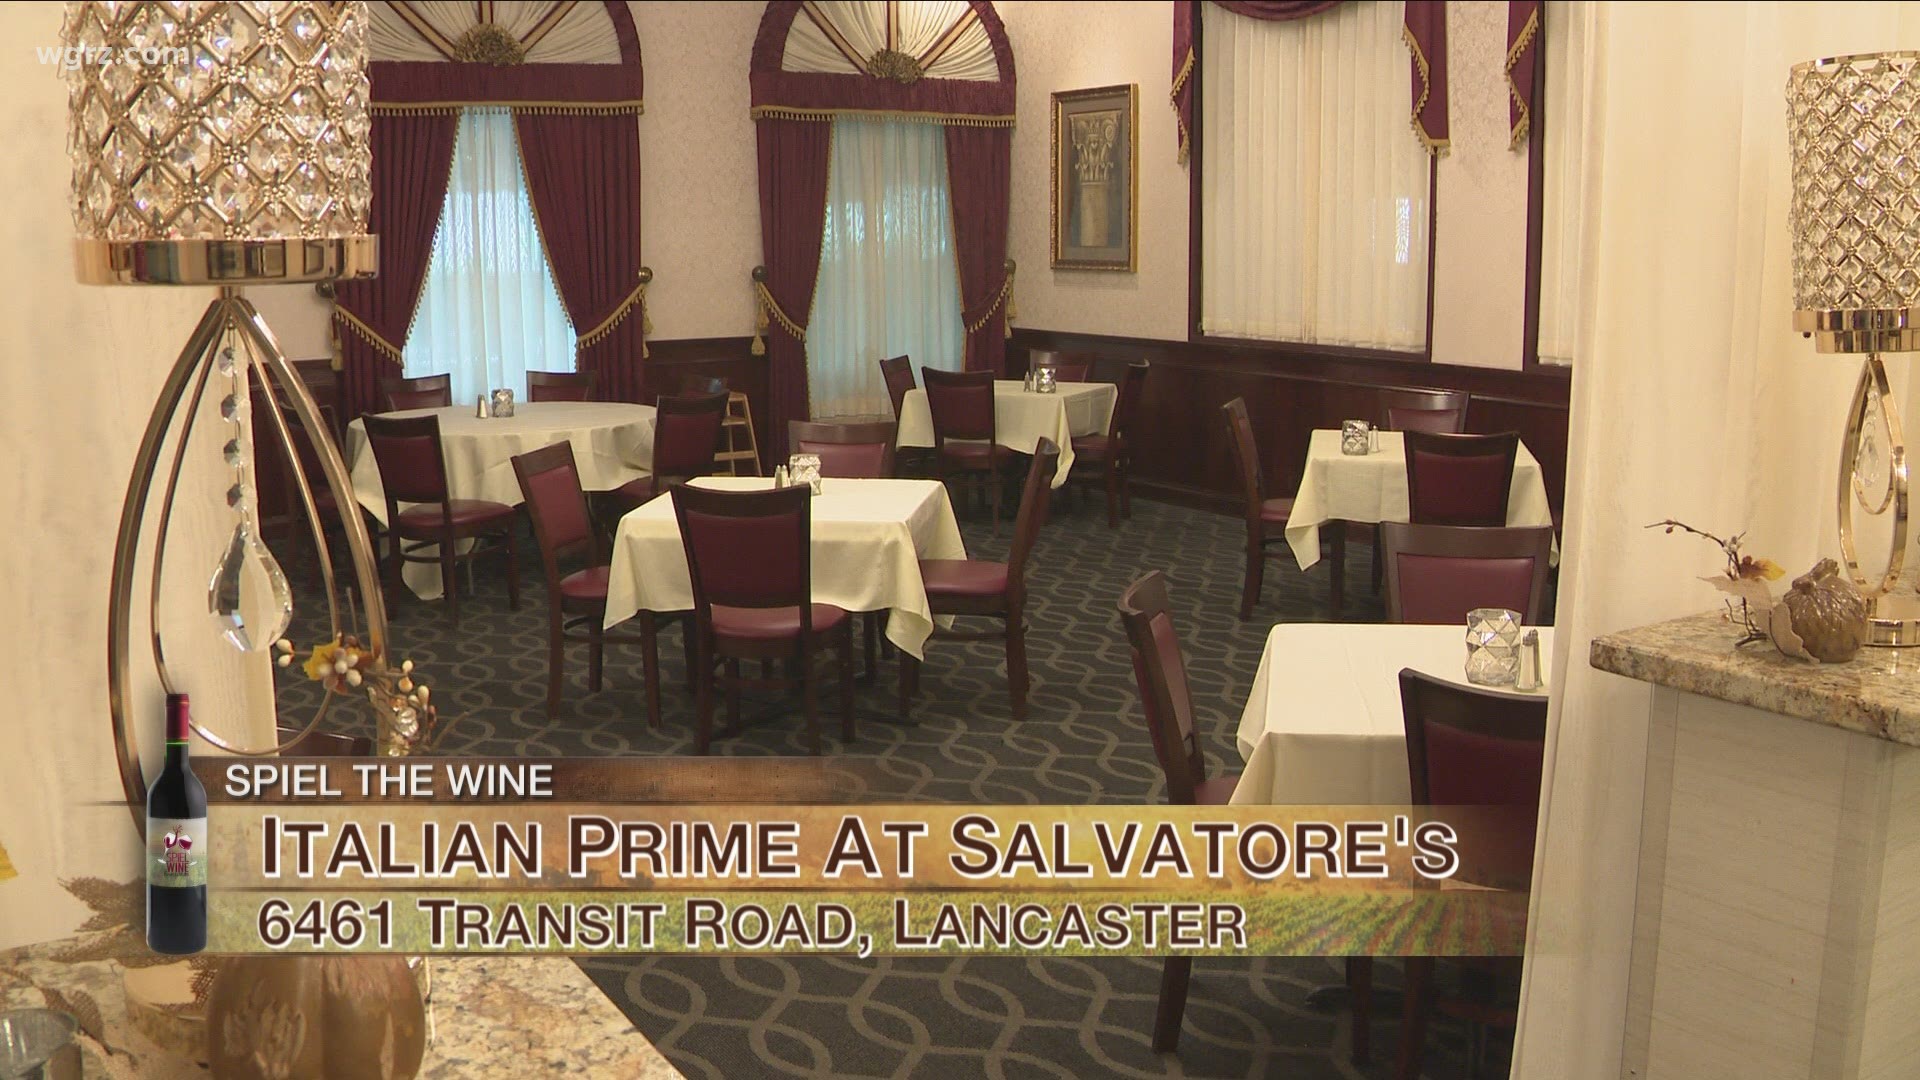 Spiel the Wine - November 21 - Segment 1 (THIS VIDEO IS SPONSORED BY ITALIAN PRIME AT SALVATORE'S)